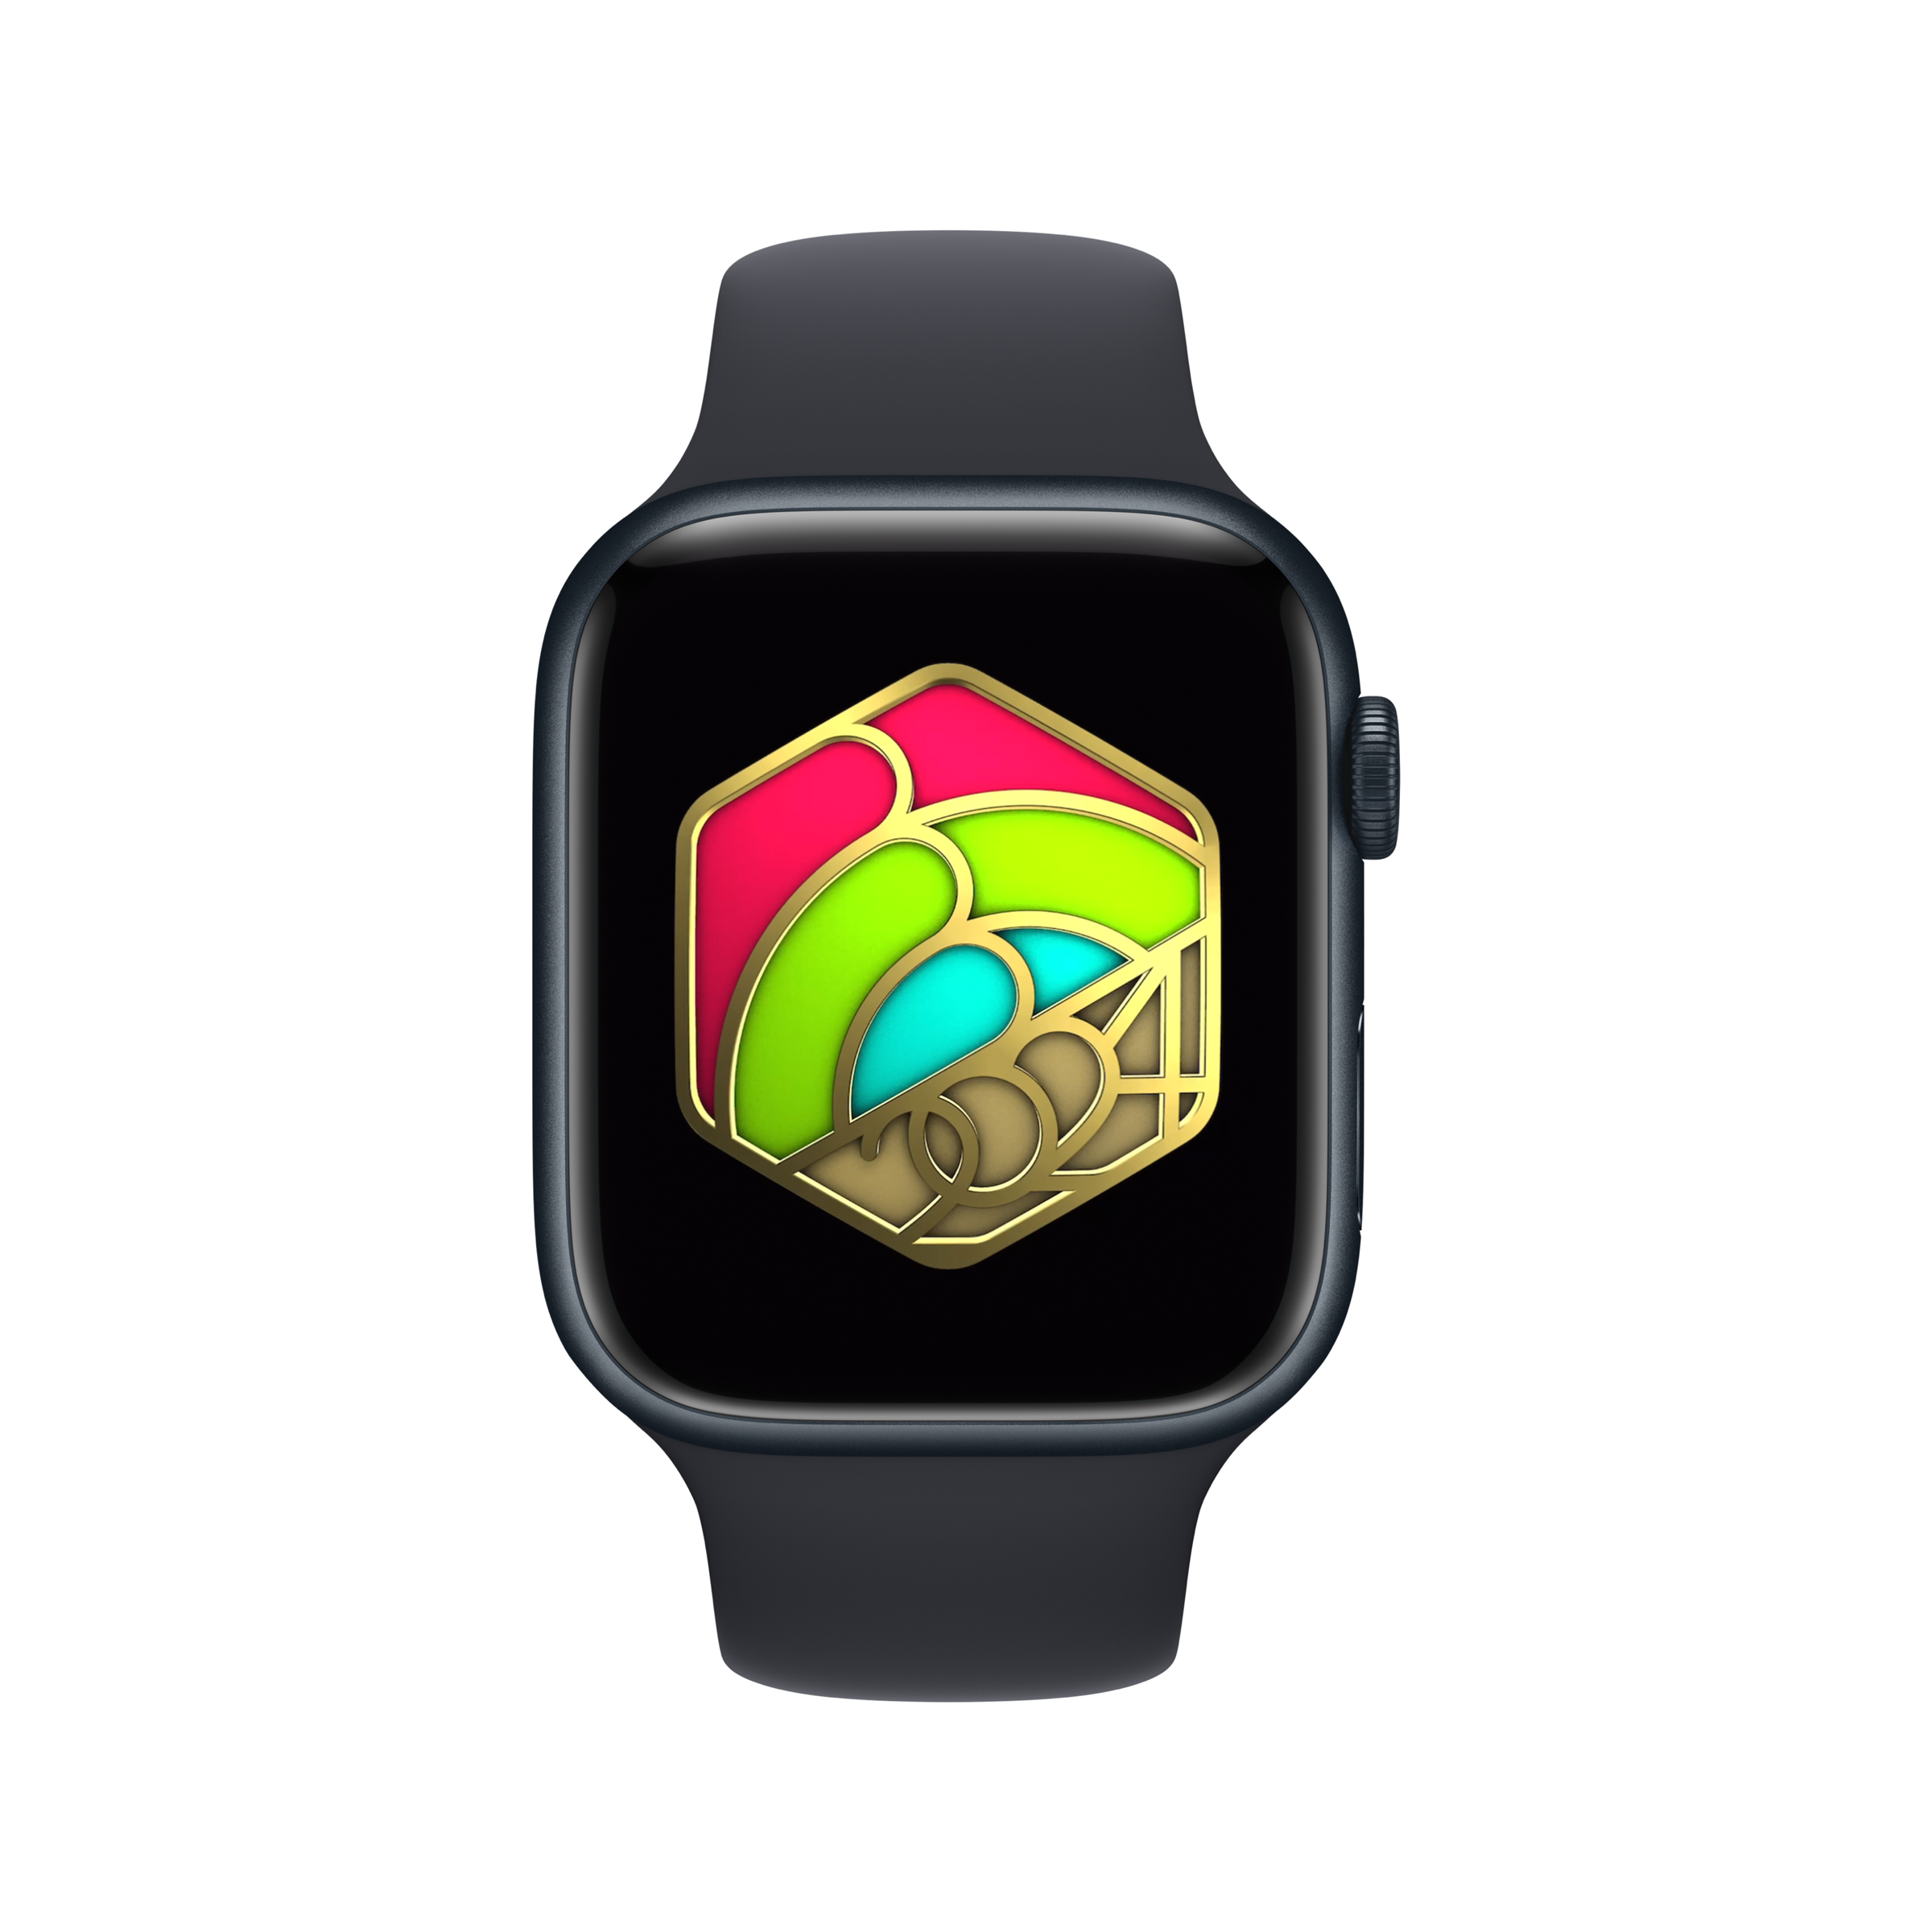 Apple Fitness Plus Apple Watch Ring in the New Year award